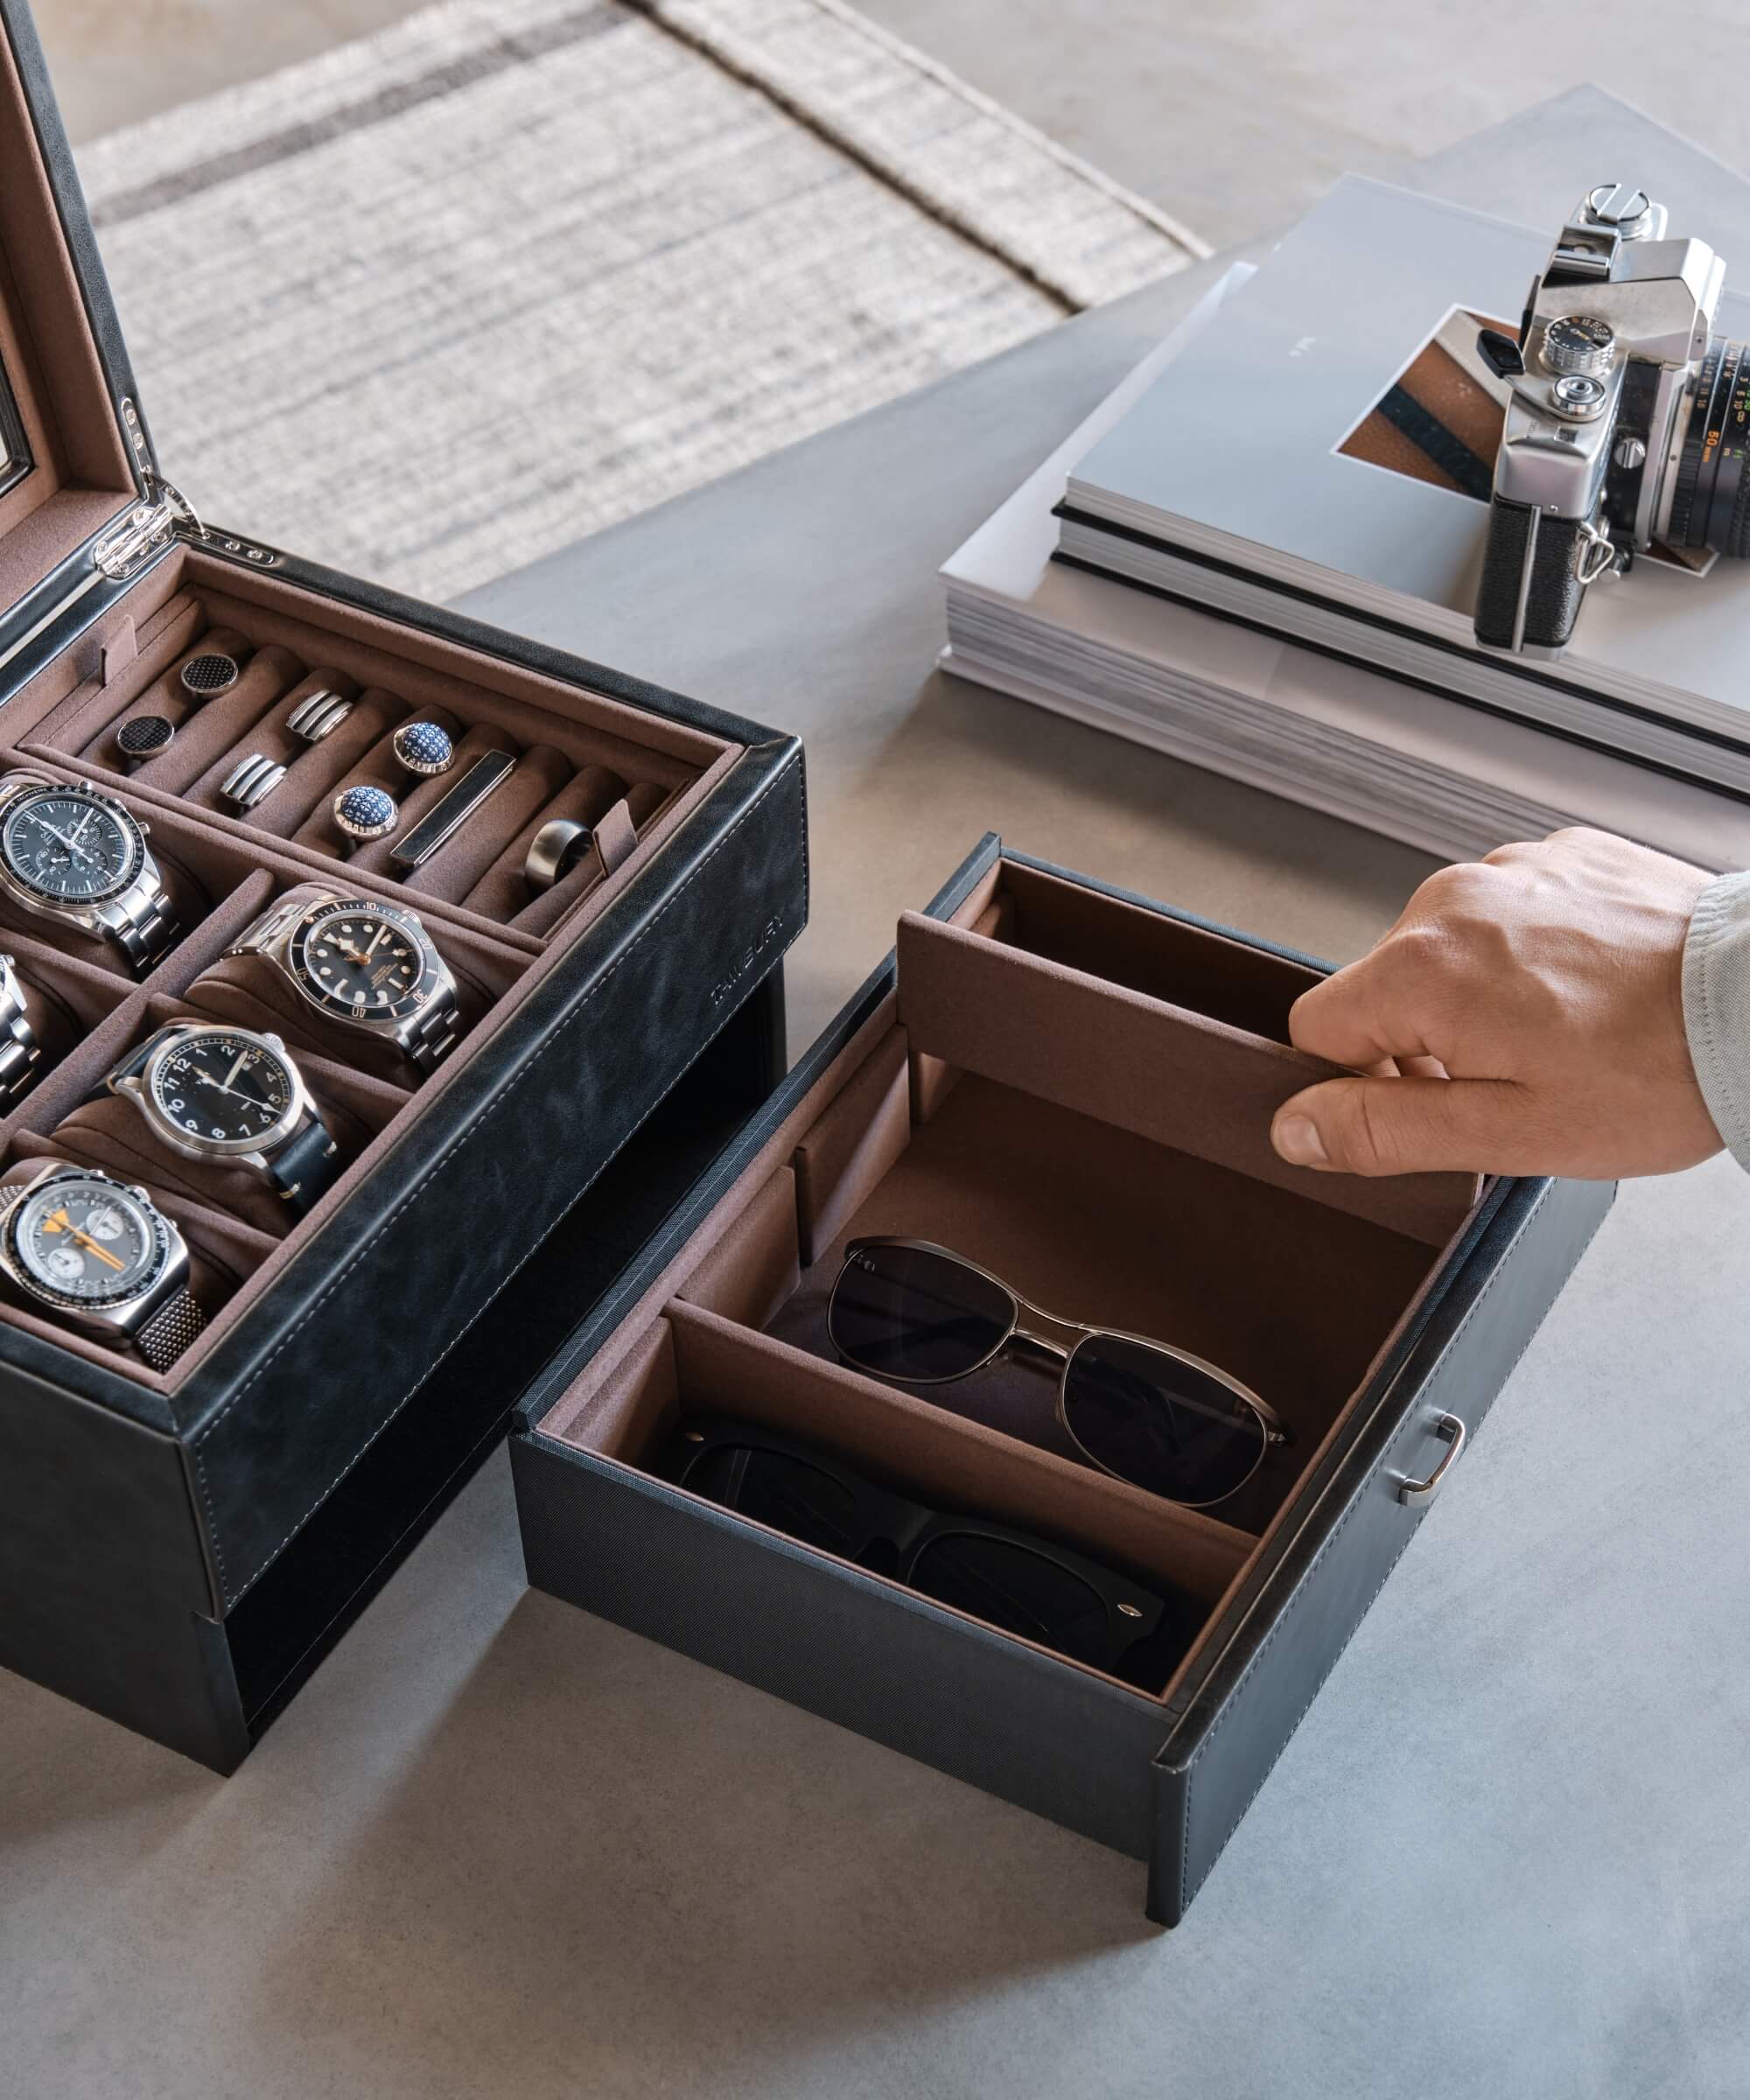 A person is opening a TAWBURY Bayswater 6 Watch Jewellery Box - Black to organise and protect their watches on a table.